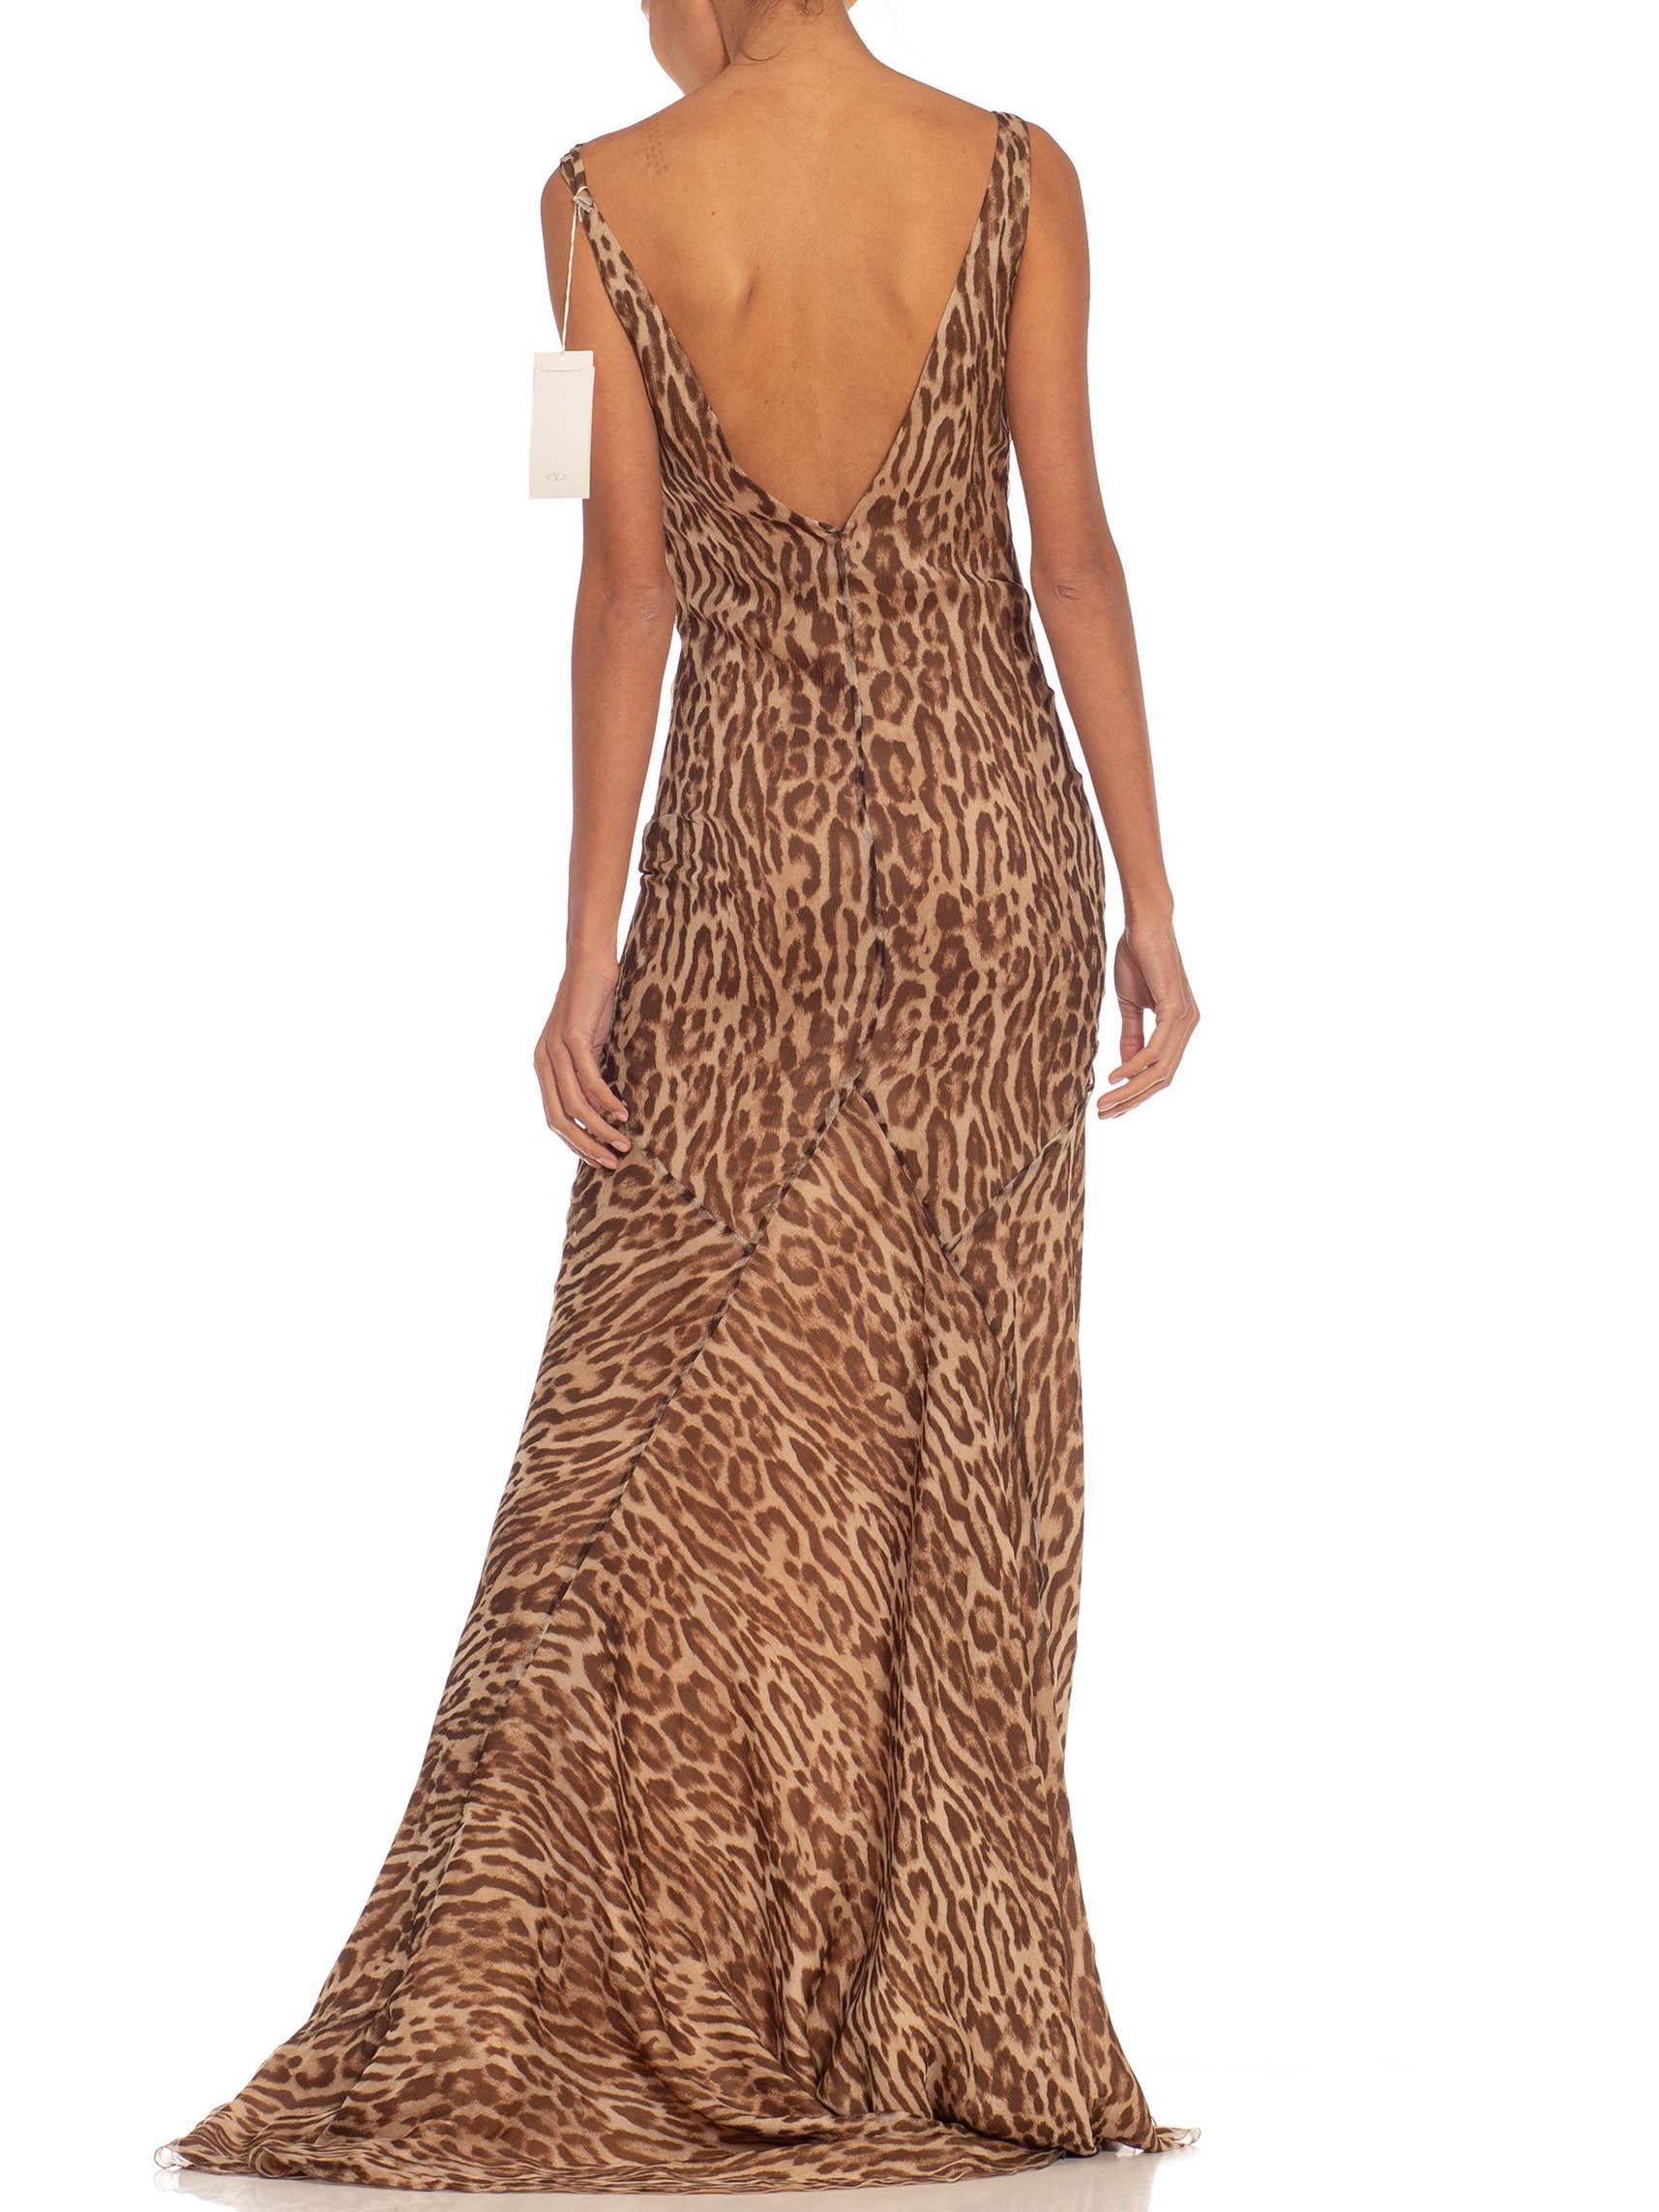 1990S VALENTINO Animal Print Brown & Cream Polyester NWT Gown For Sale 4